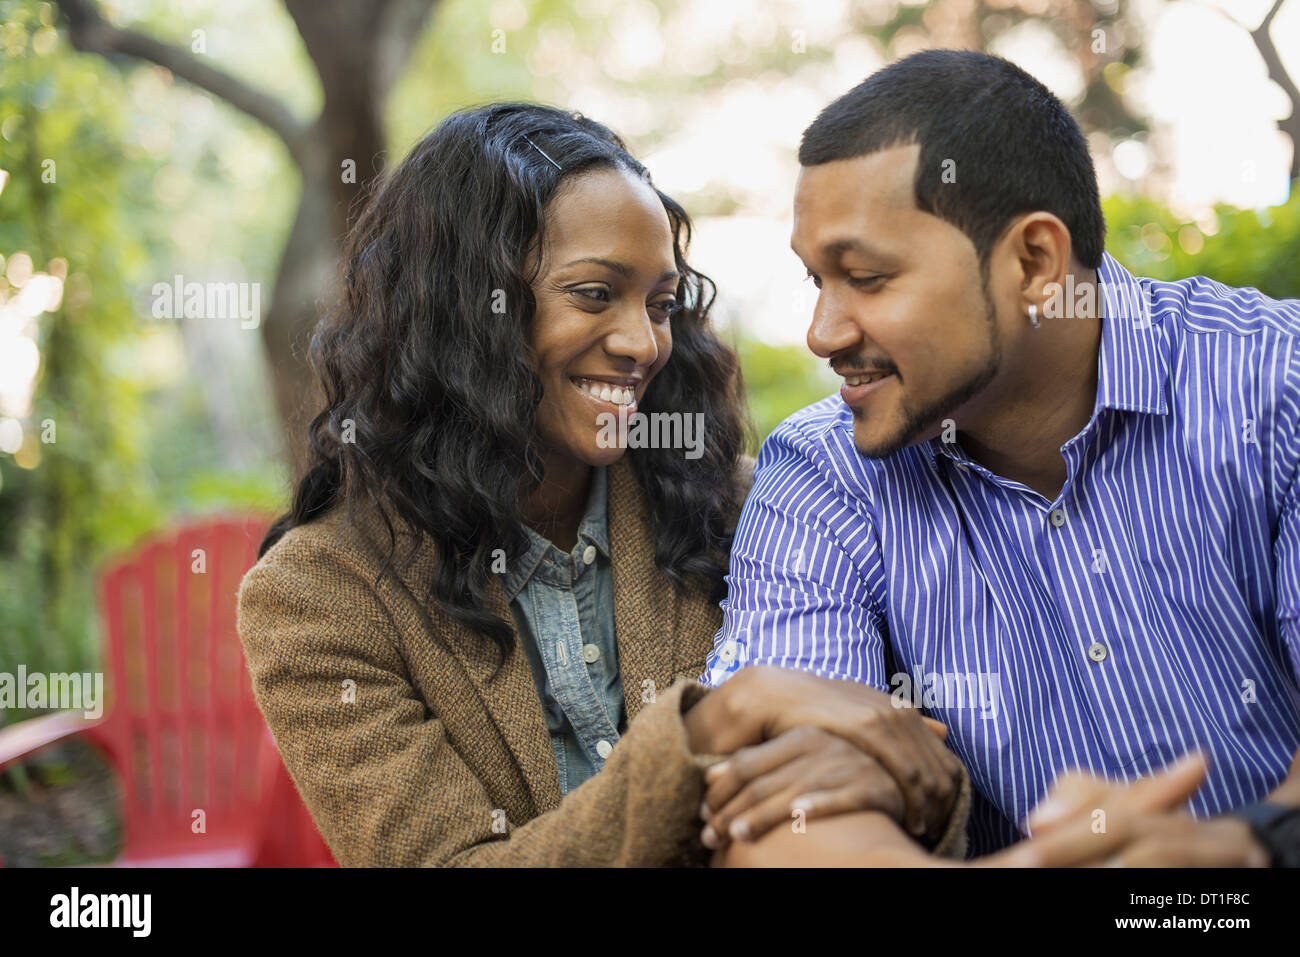 Scenes from urban life in New York City A man and a woman a couple with linked arms sitting side by side Stock Photo